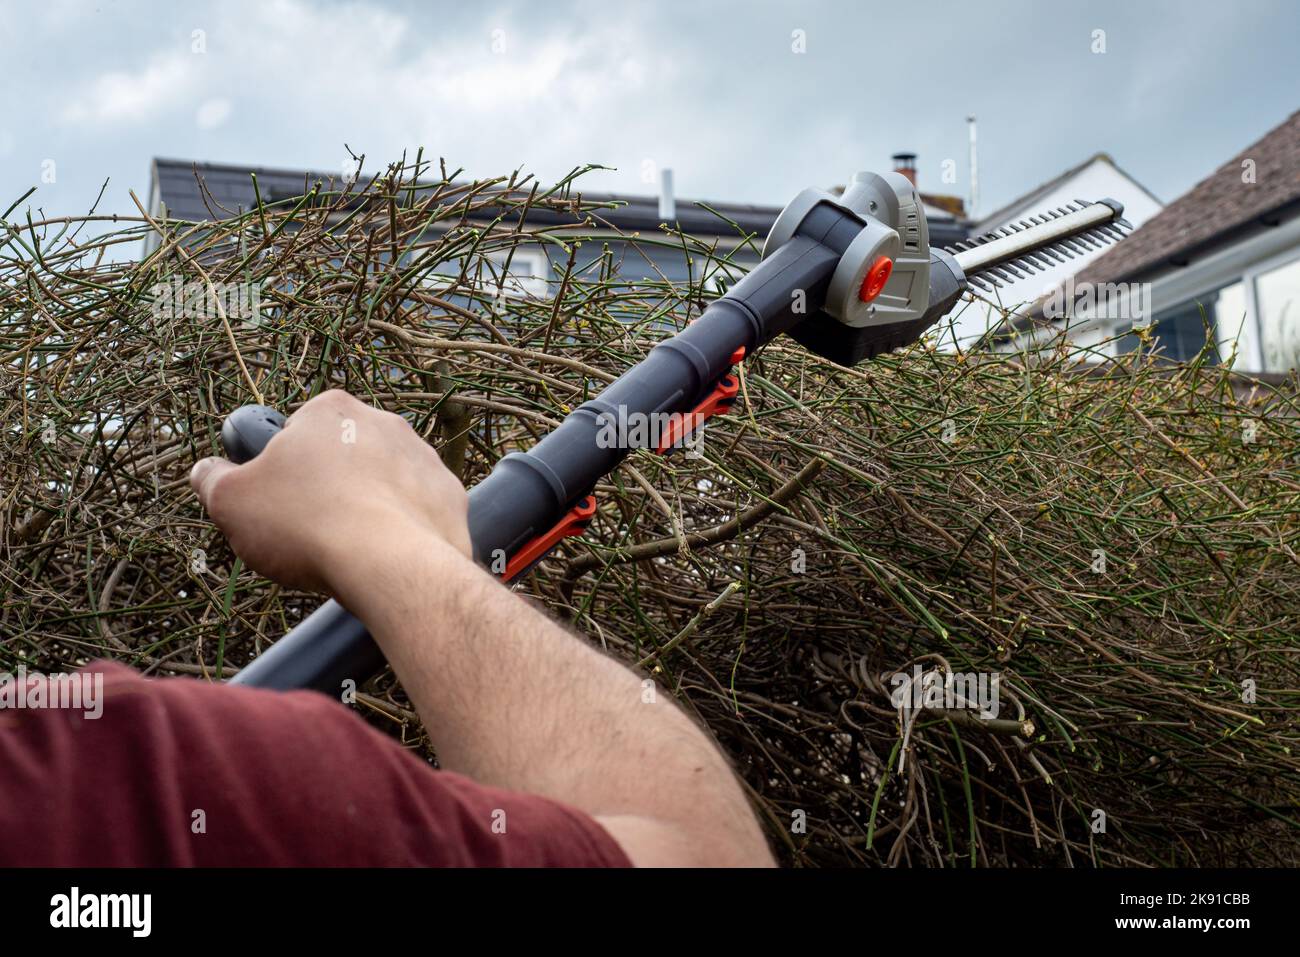 Man's arm holding battery powered hedge trimmers to clip branches and leaves from overgrown hedge. Stock Photo